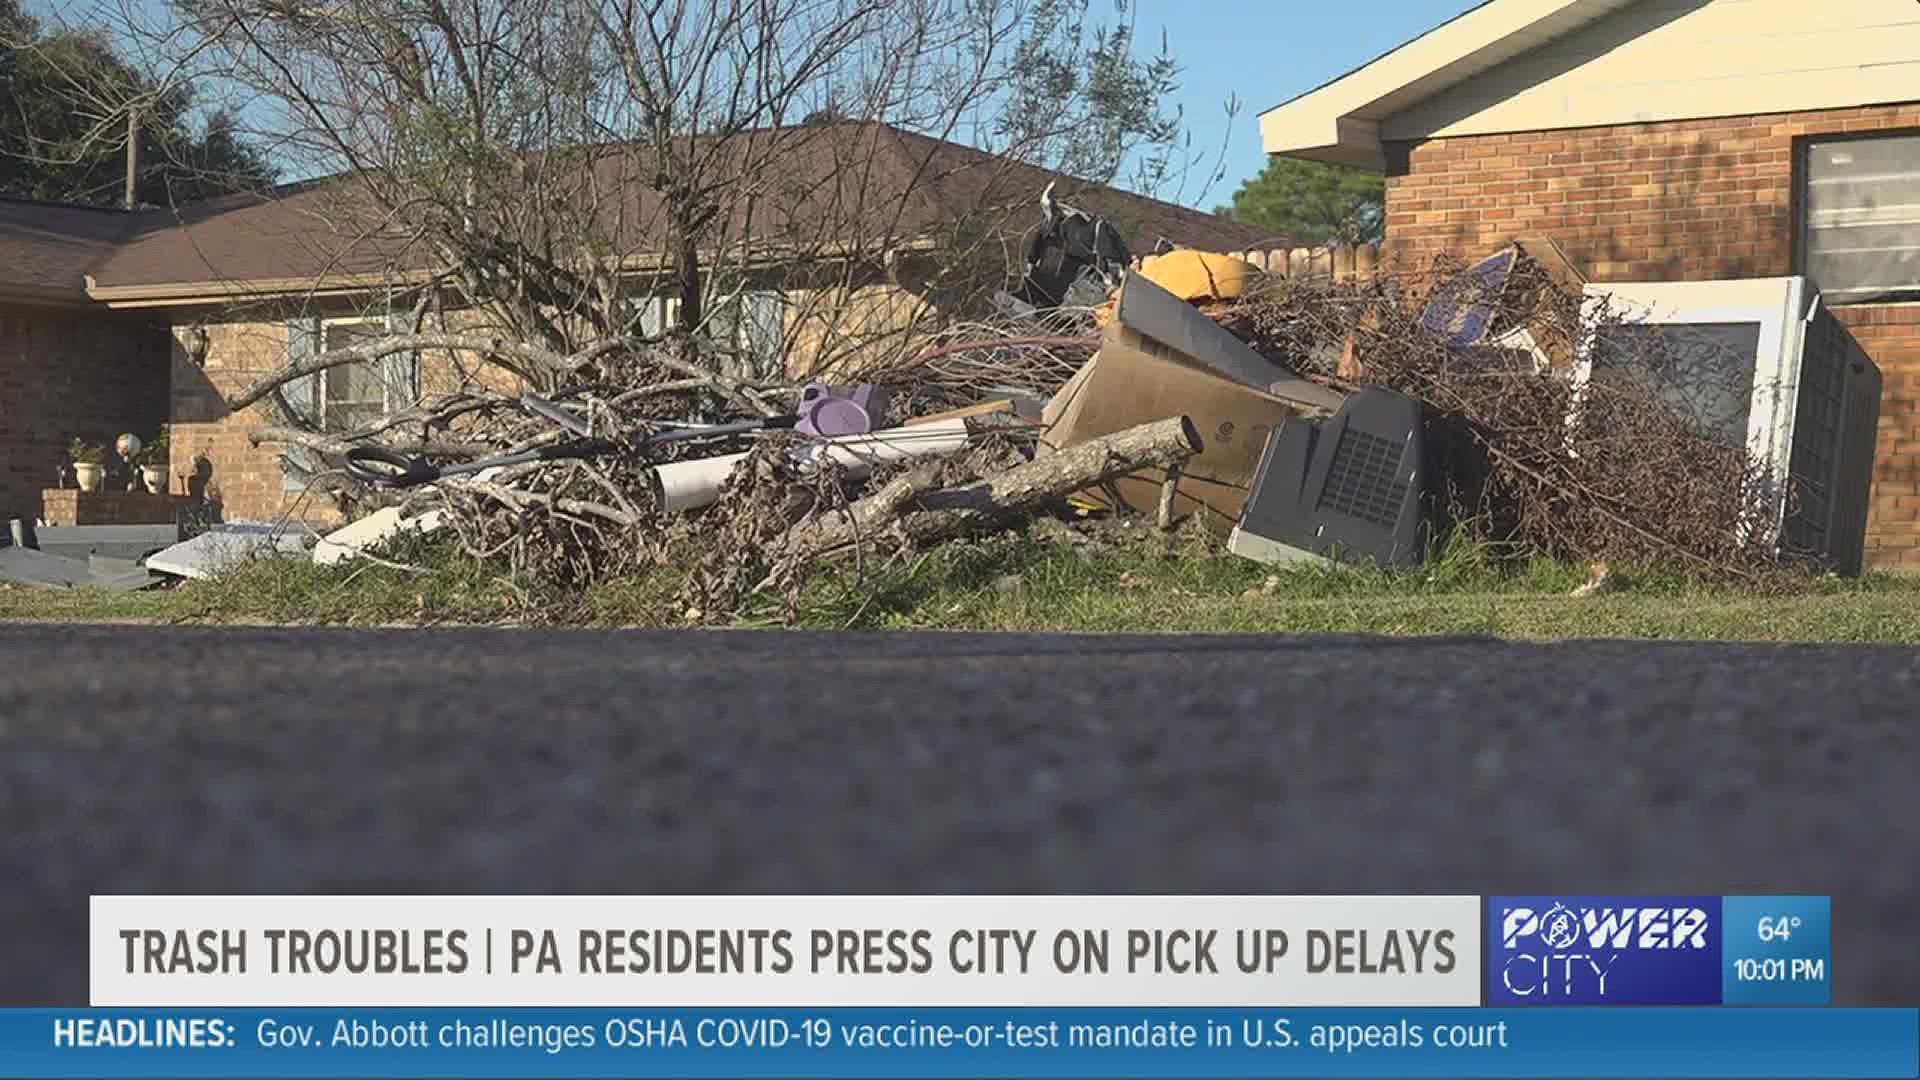 Members of the Port Arthur community said trash is being left on curbs weeks past pickup day.